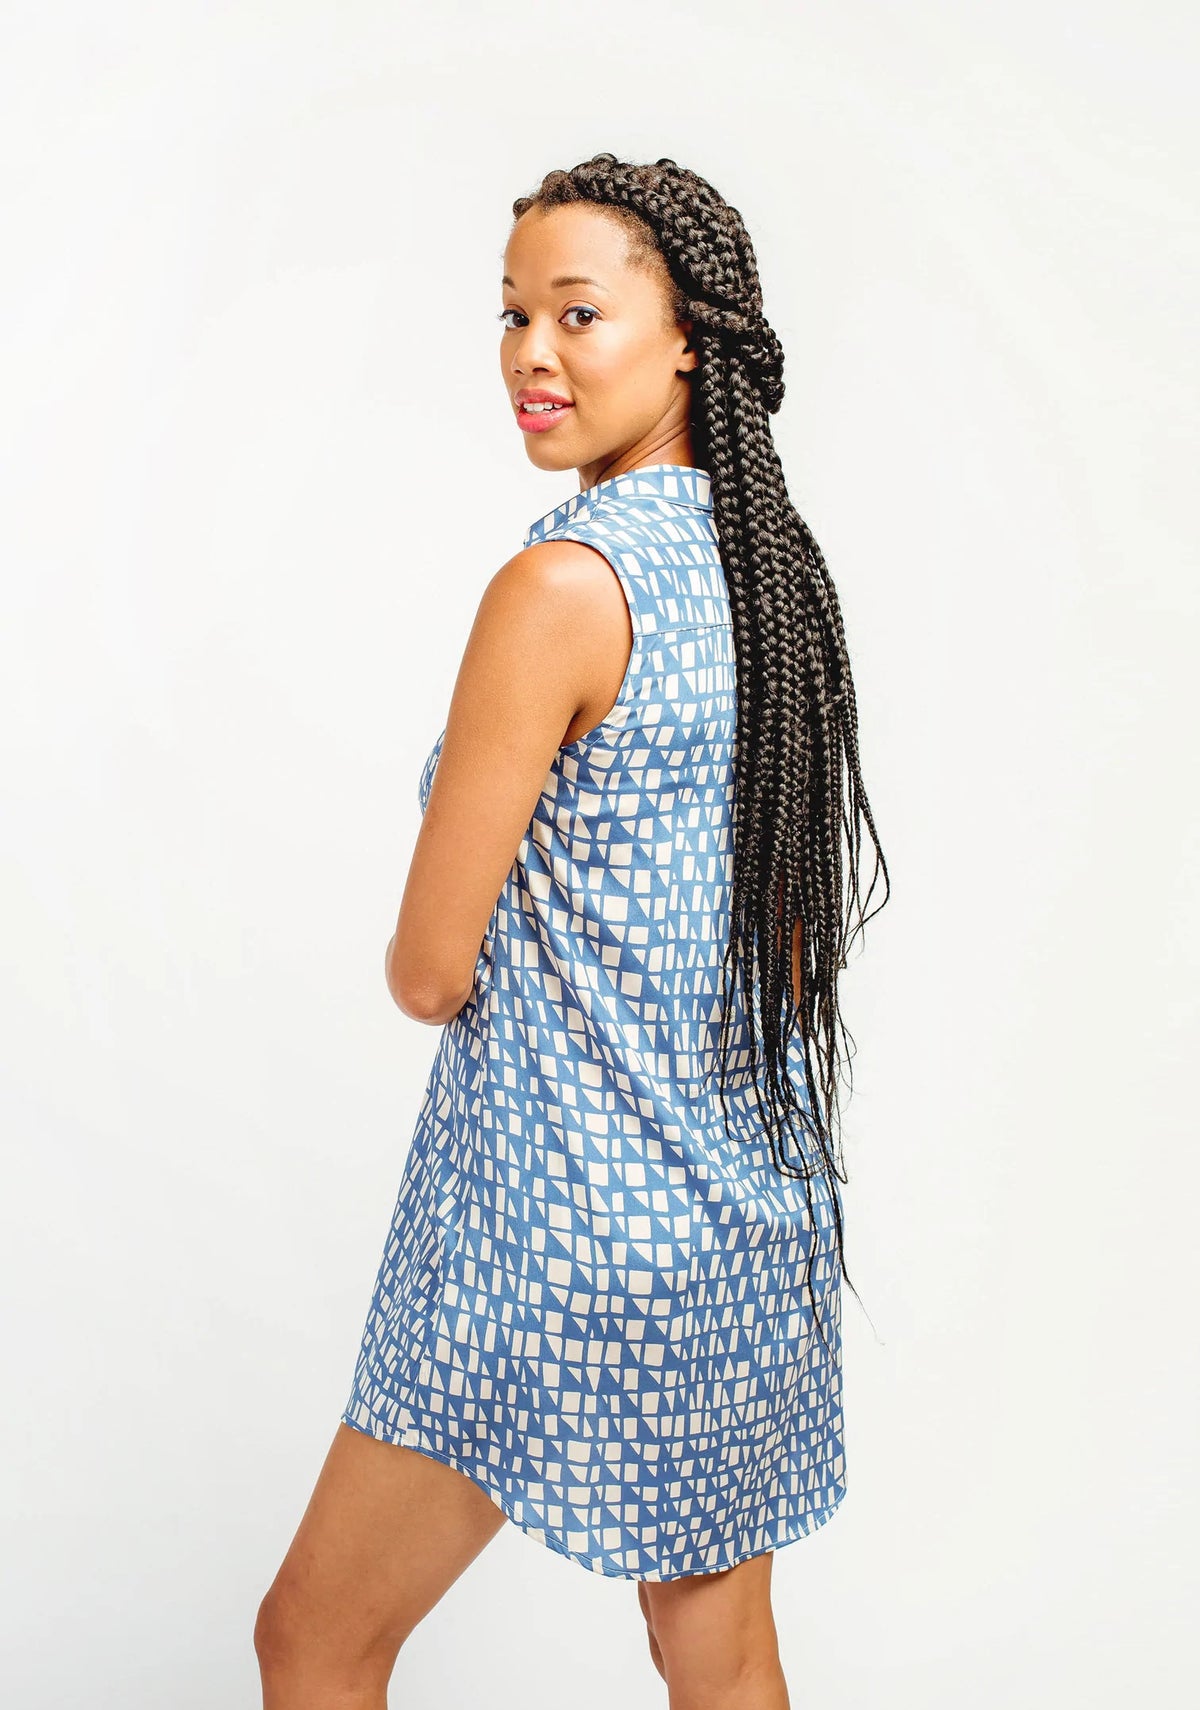 Model Lauren is wearing a size 8, view A Alder Shirtdress in a blue patterned fabric. She is modeling the back side of the shirtdress.